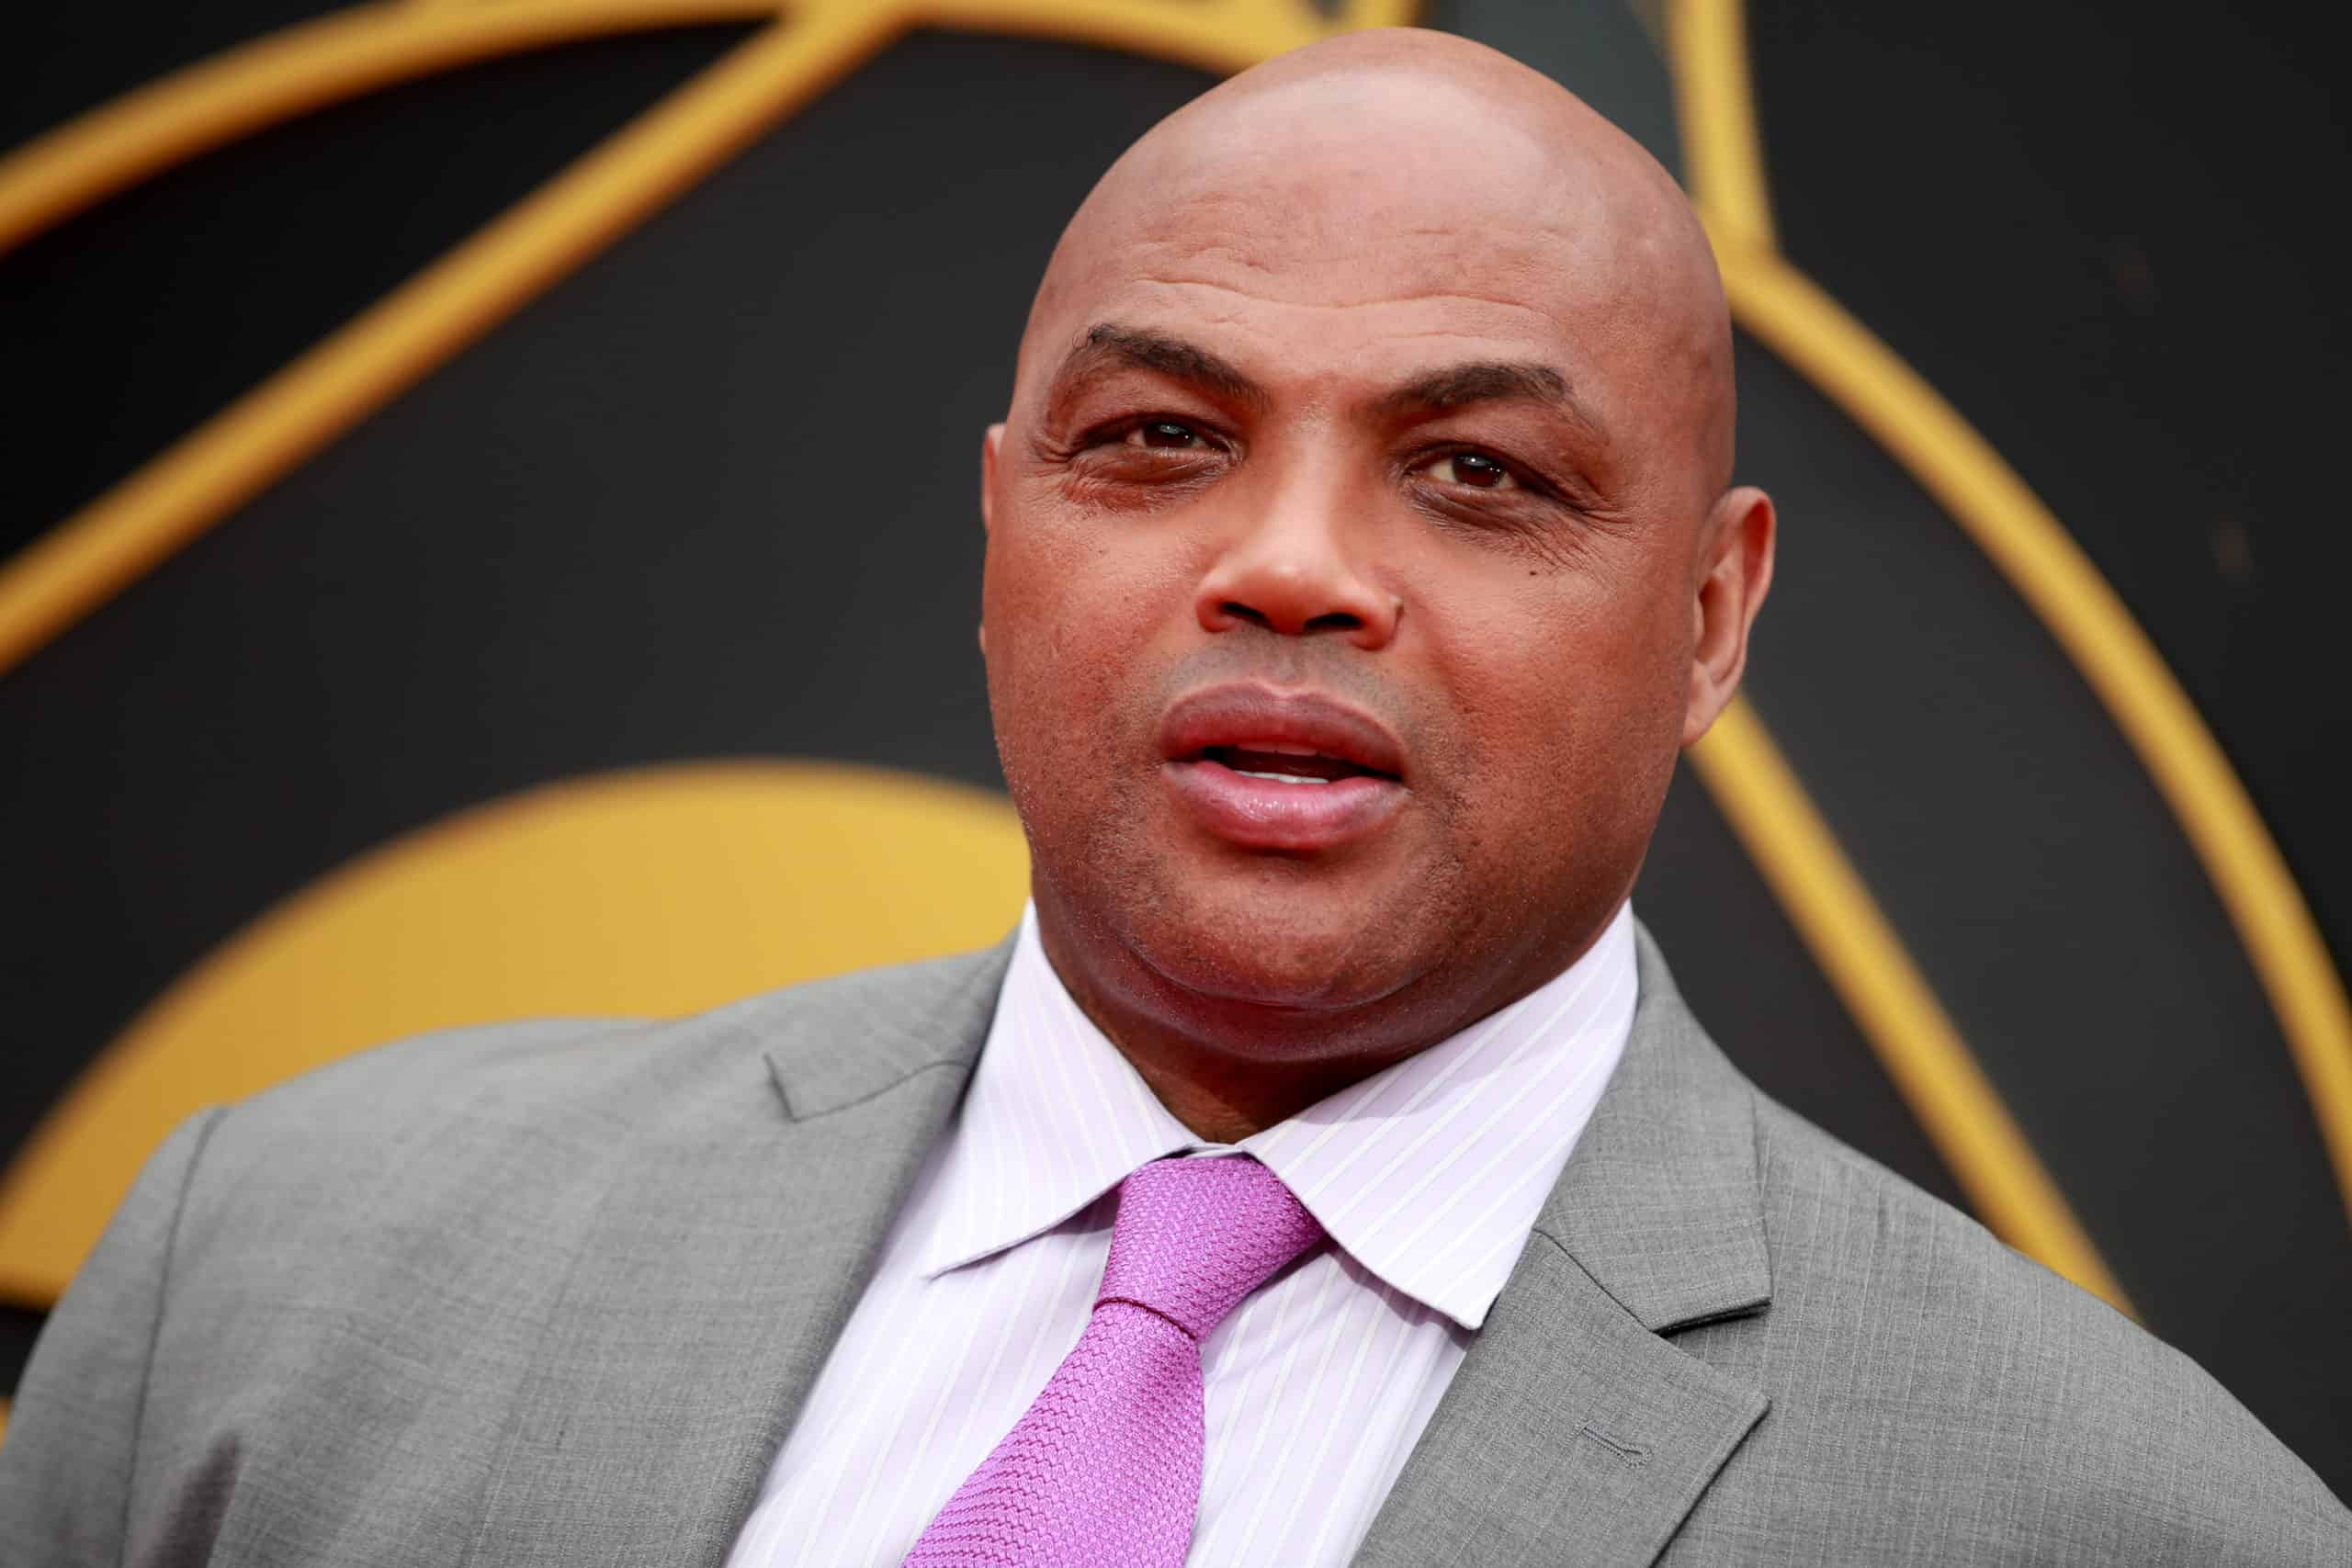 Charles Barkley Thinks Pro Athletes Should Get Vaccinated First Because They Pay More Taxes